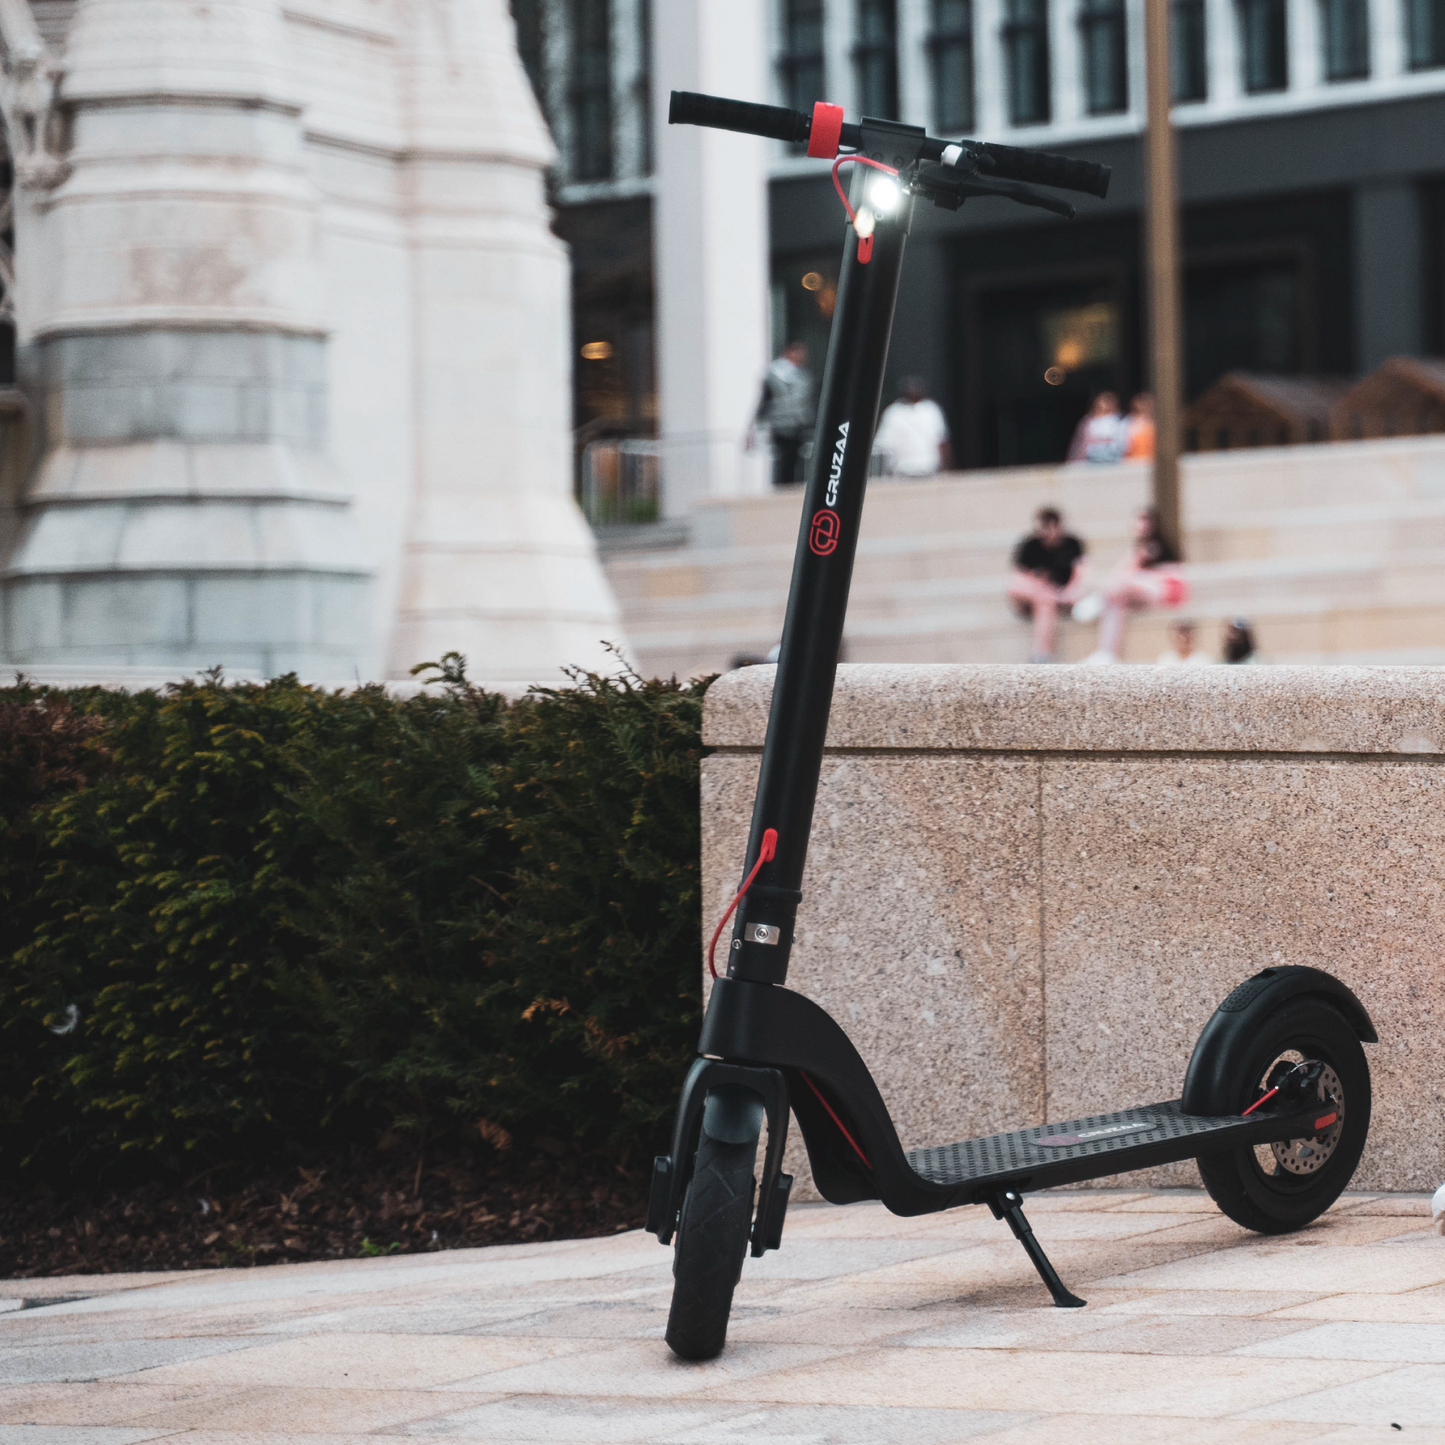 The Official Cruzaa Commuta E-Scooter 45km Range - 25kmh Top Speed - ships from Germany